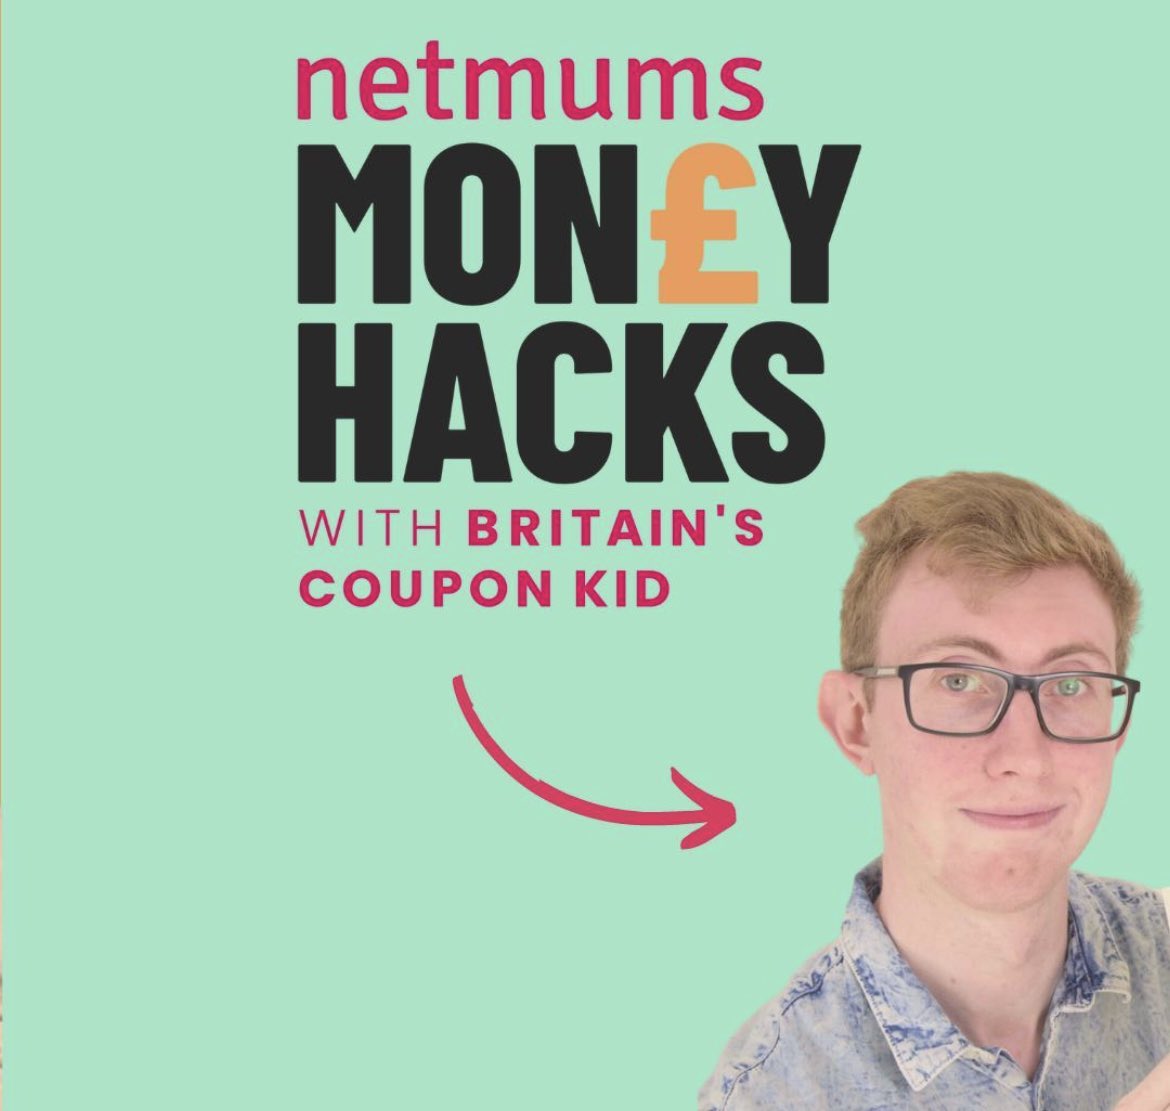 Exciting news - going forward, i’m now a weekly columnist for @Netmums, sharing money saving tips & tricks 🥳 My first article - 5 apps you should have downloaded on your phone to save you £1,000+ a year 😊 netmums.com/cost-of-living…